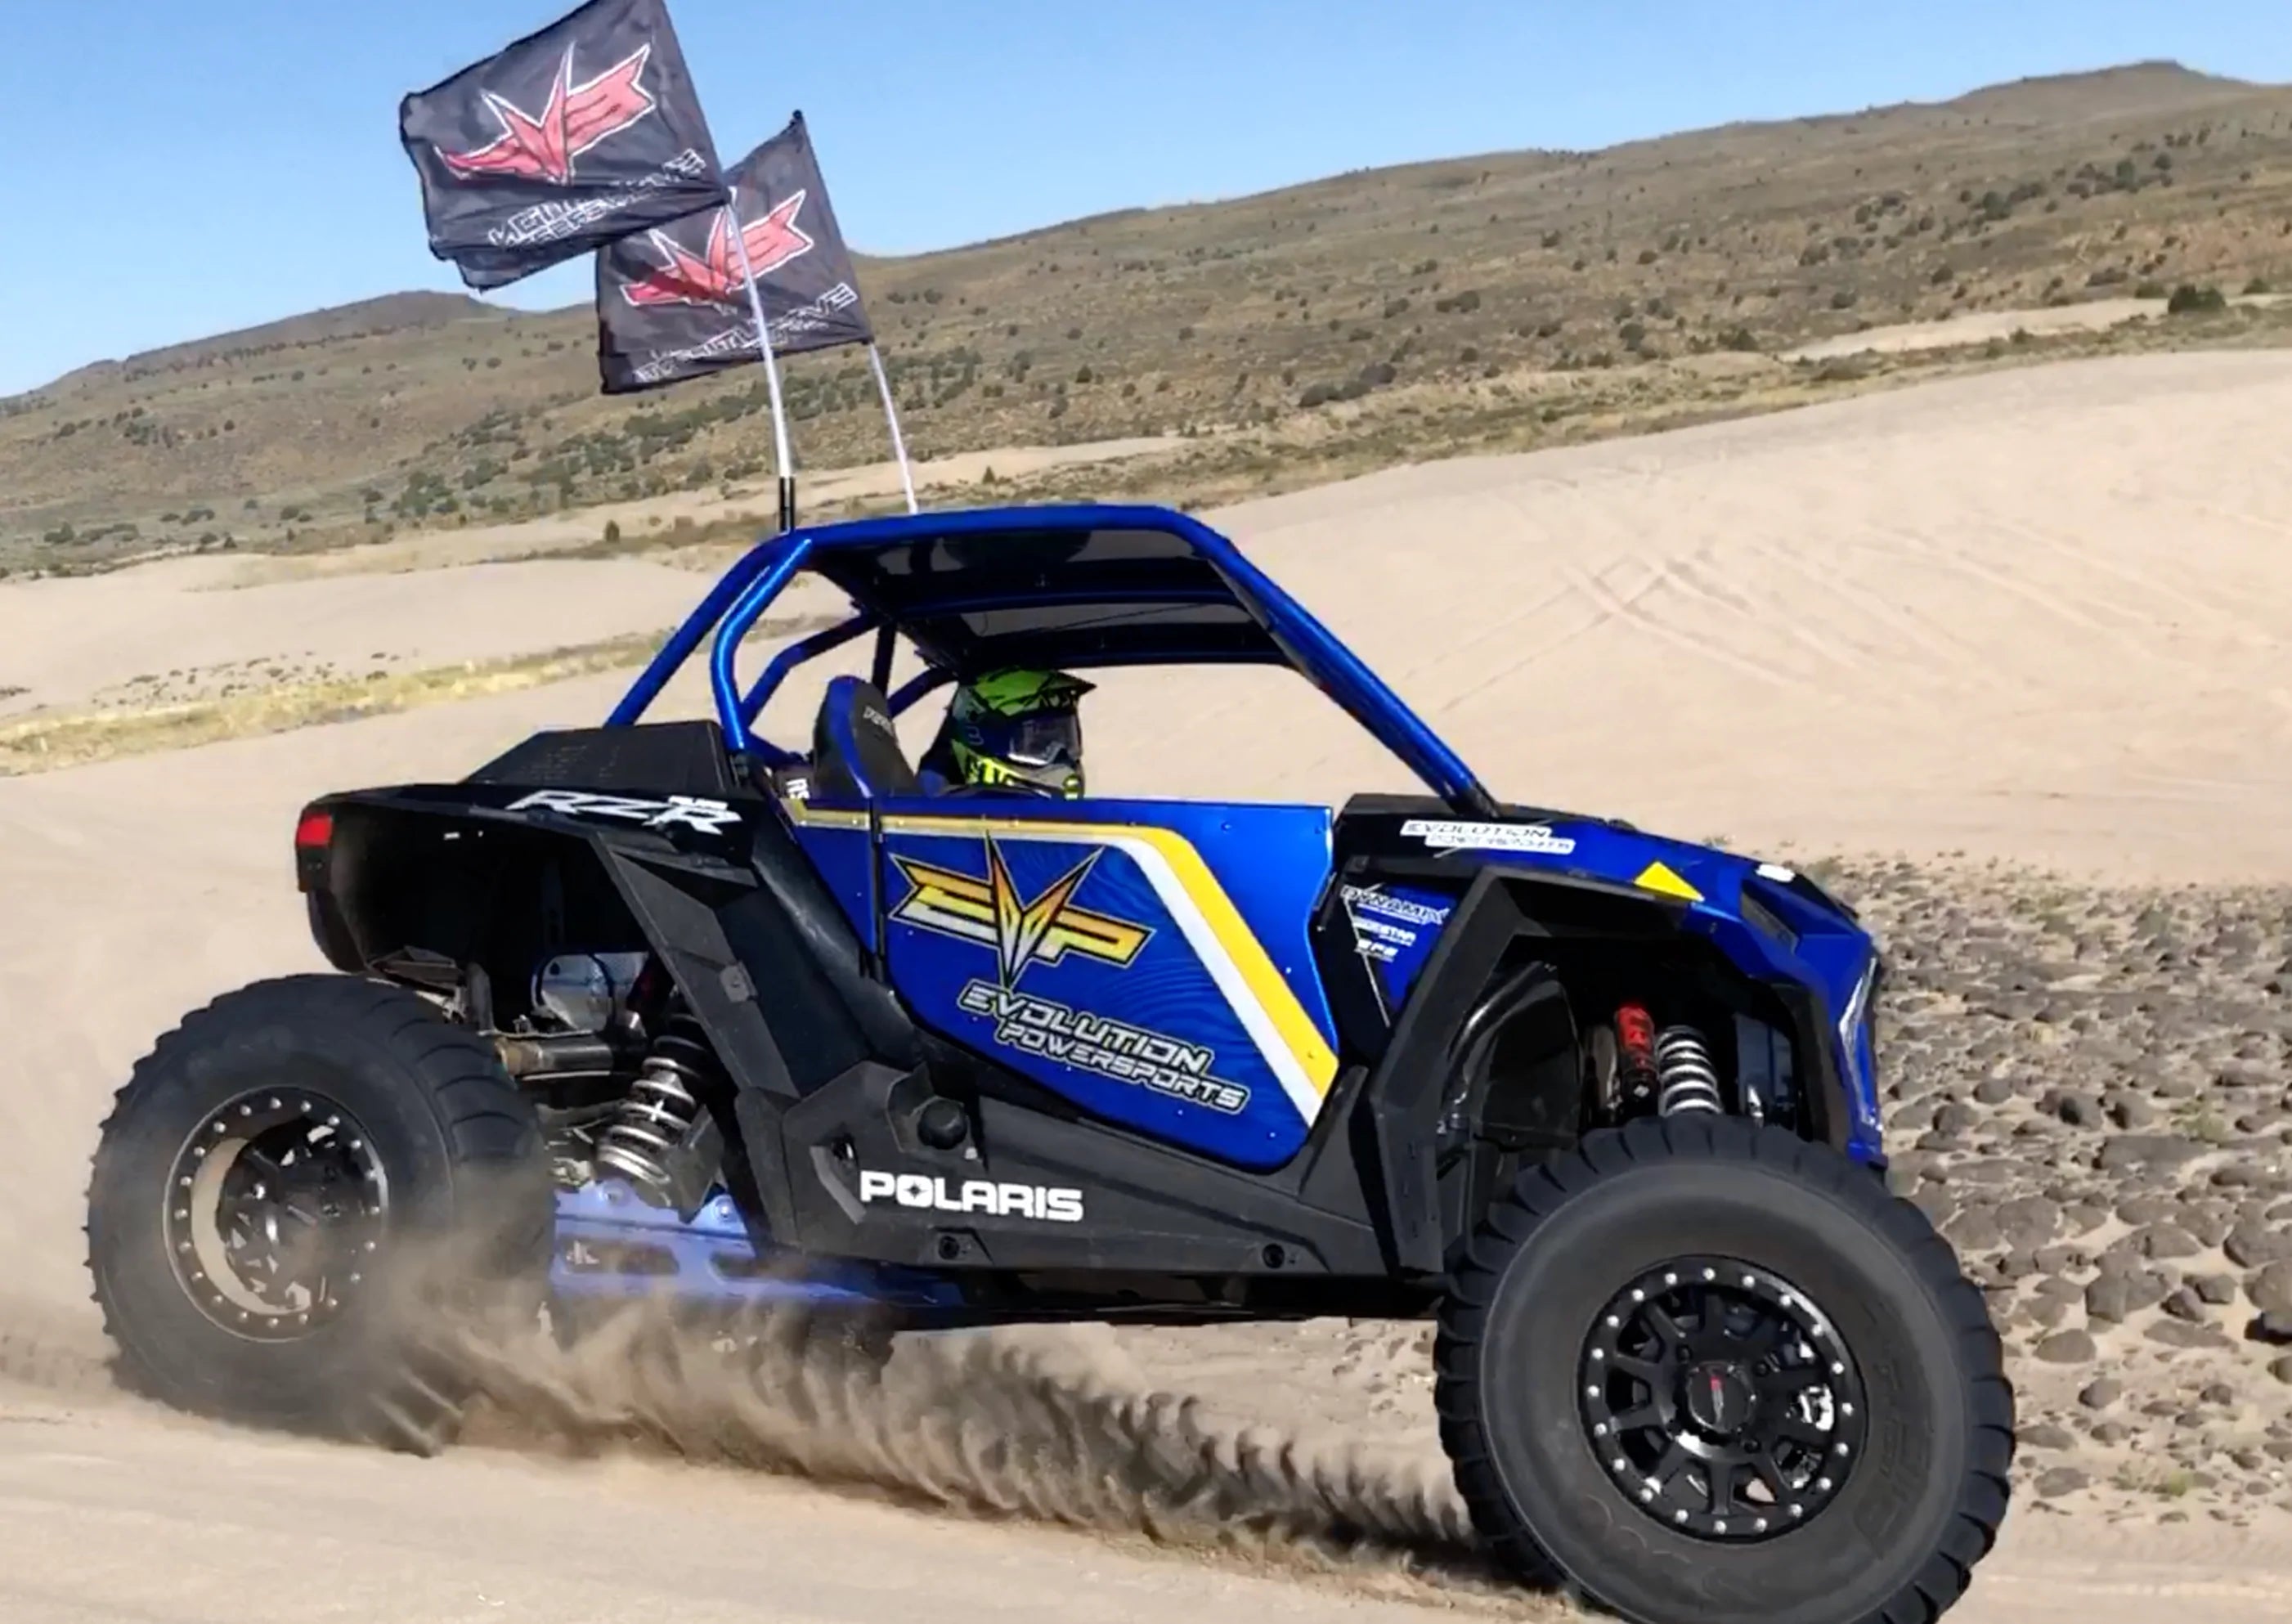 2019-'21 Polaris RZR XP Turbo/S With FPCM CodeShooter Complete Power Package